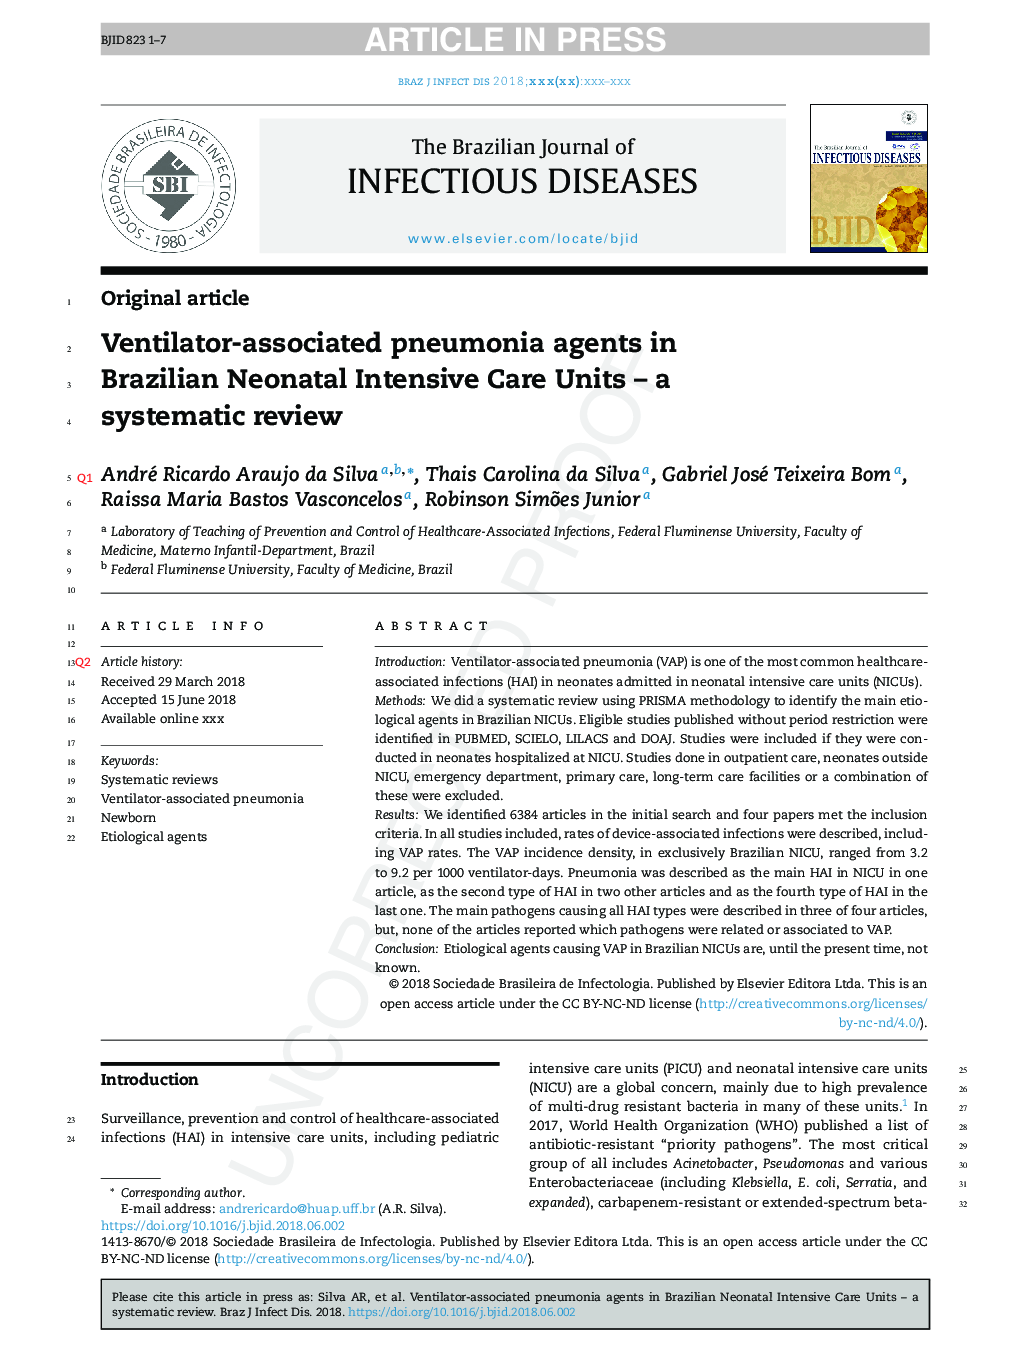 Ventilator-associated pneumonia agents in Brazilian Neonatal Intensive Care Units - a systematic review